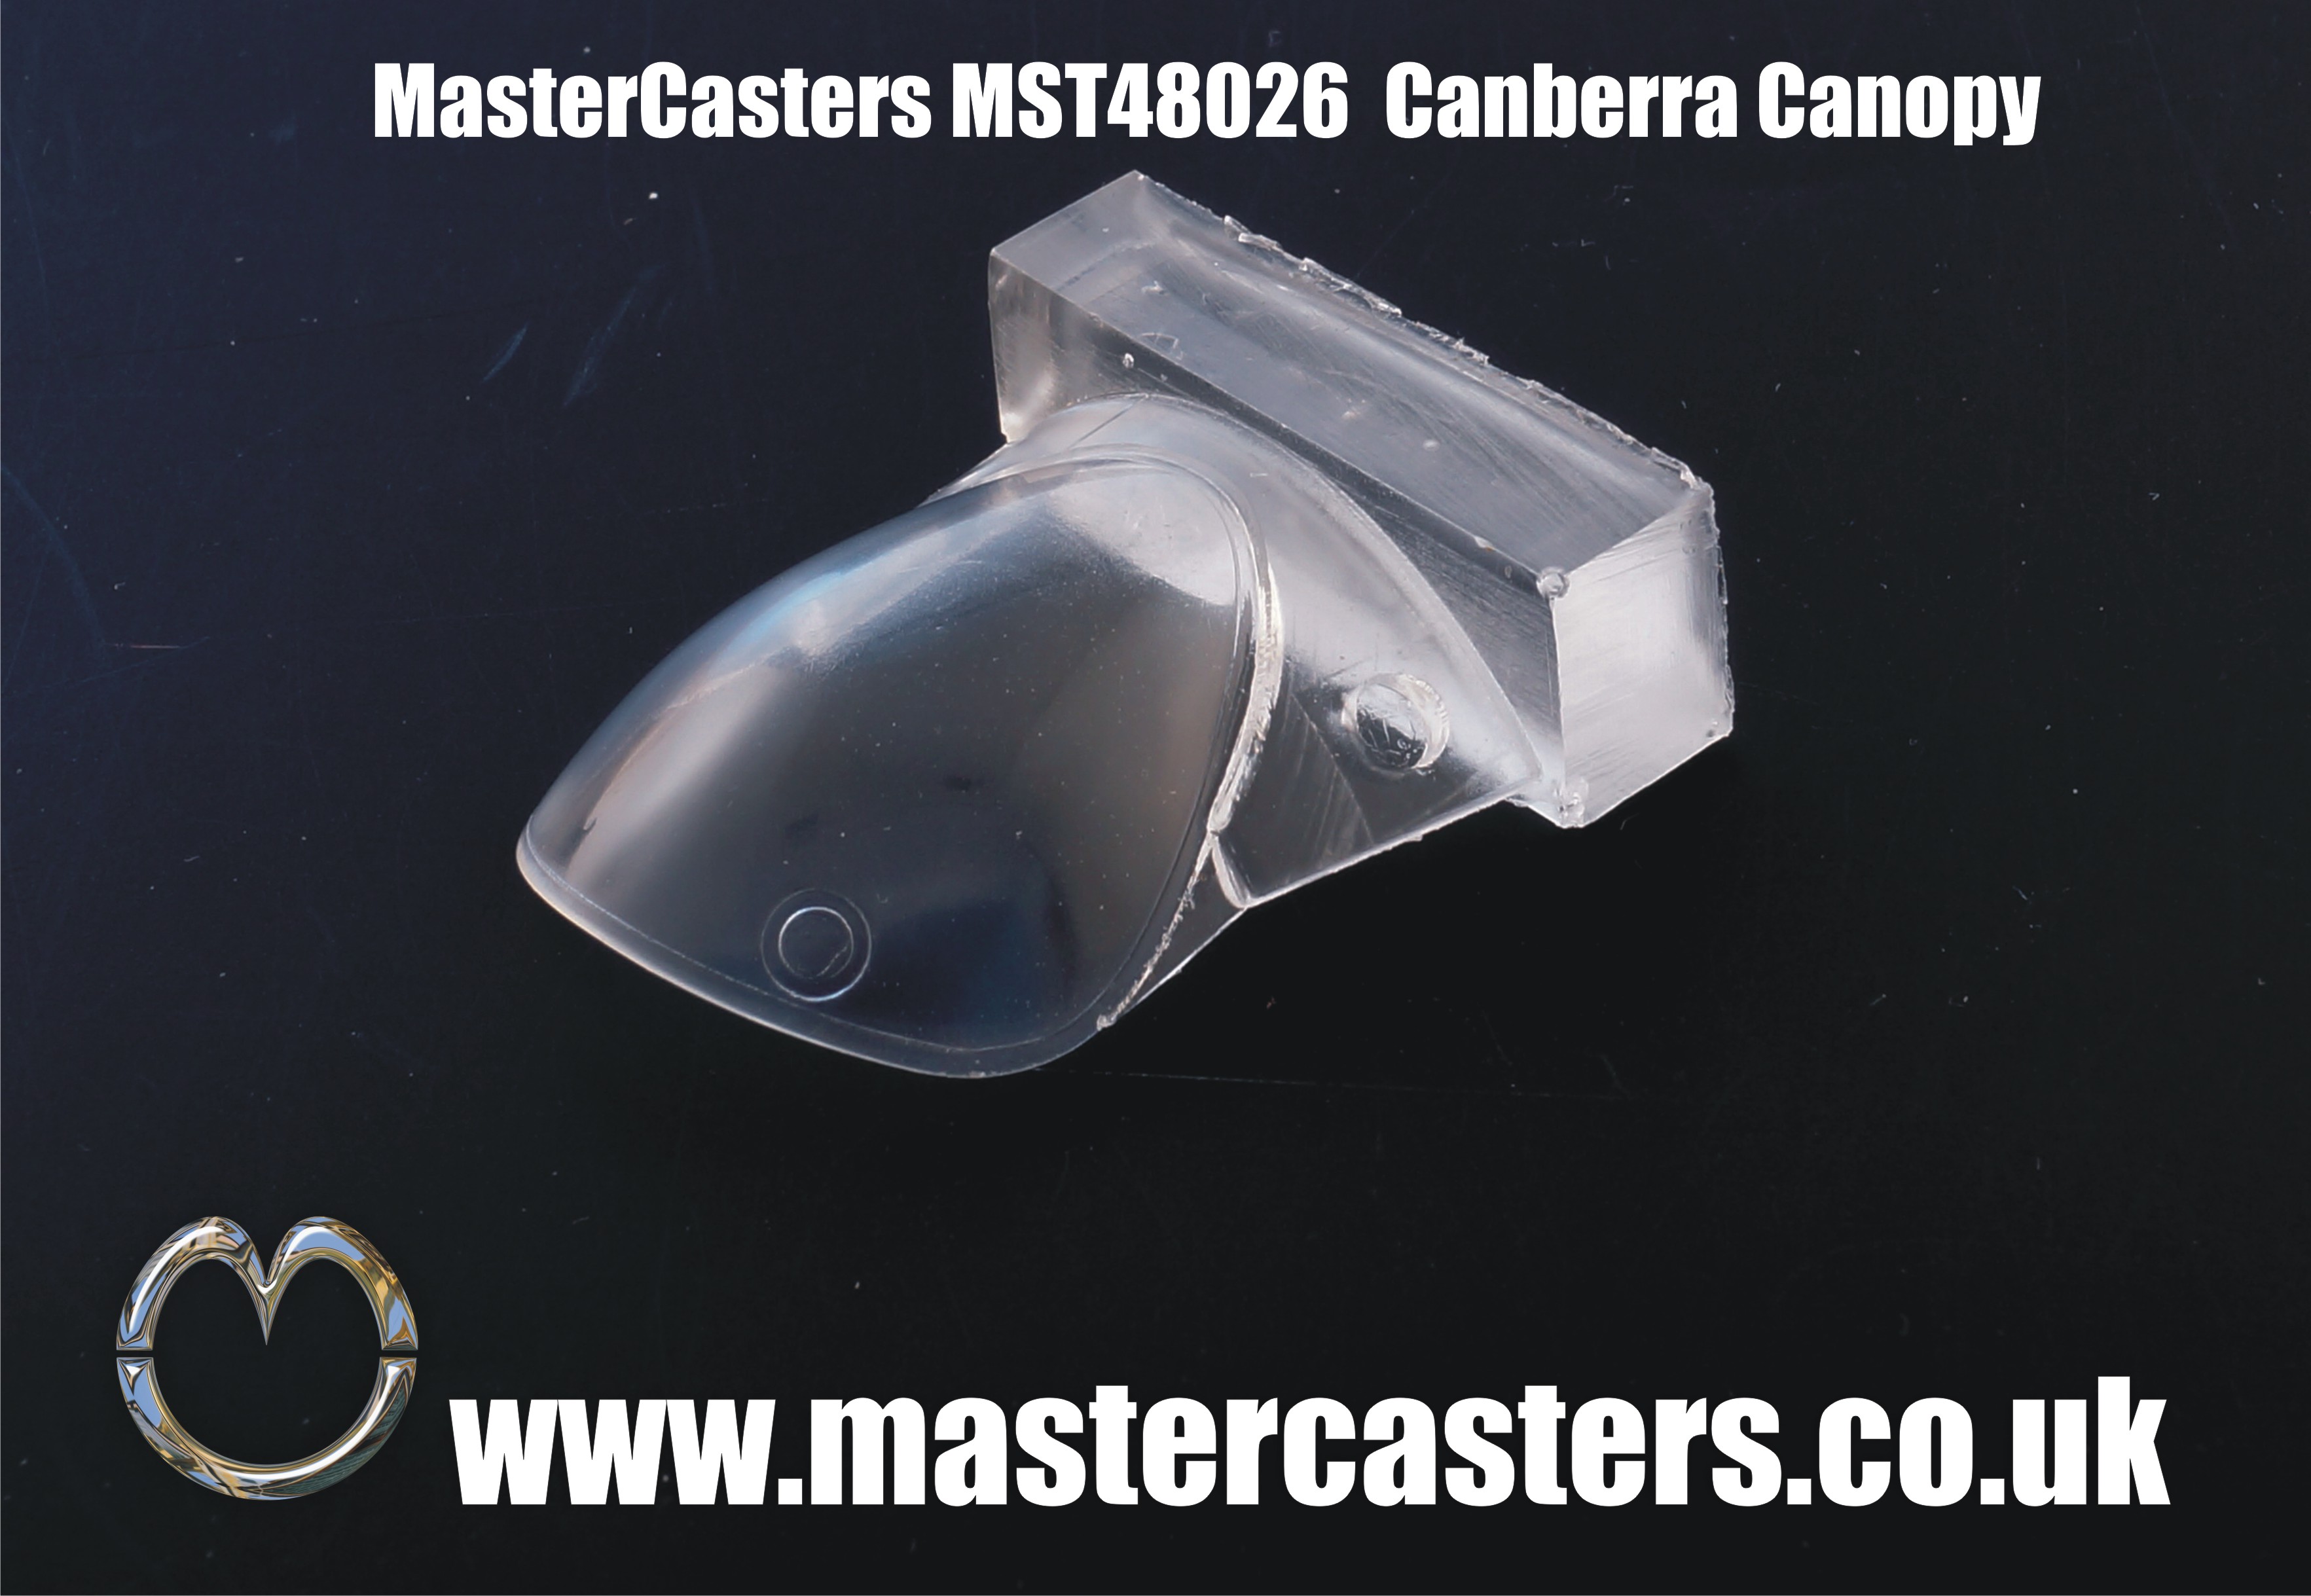 MST48026 BAC/EE Canberra Corrected Canopy